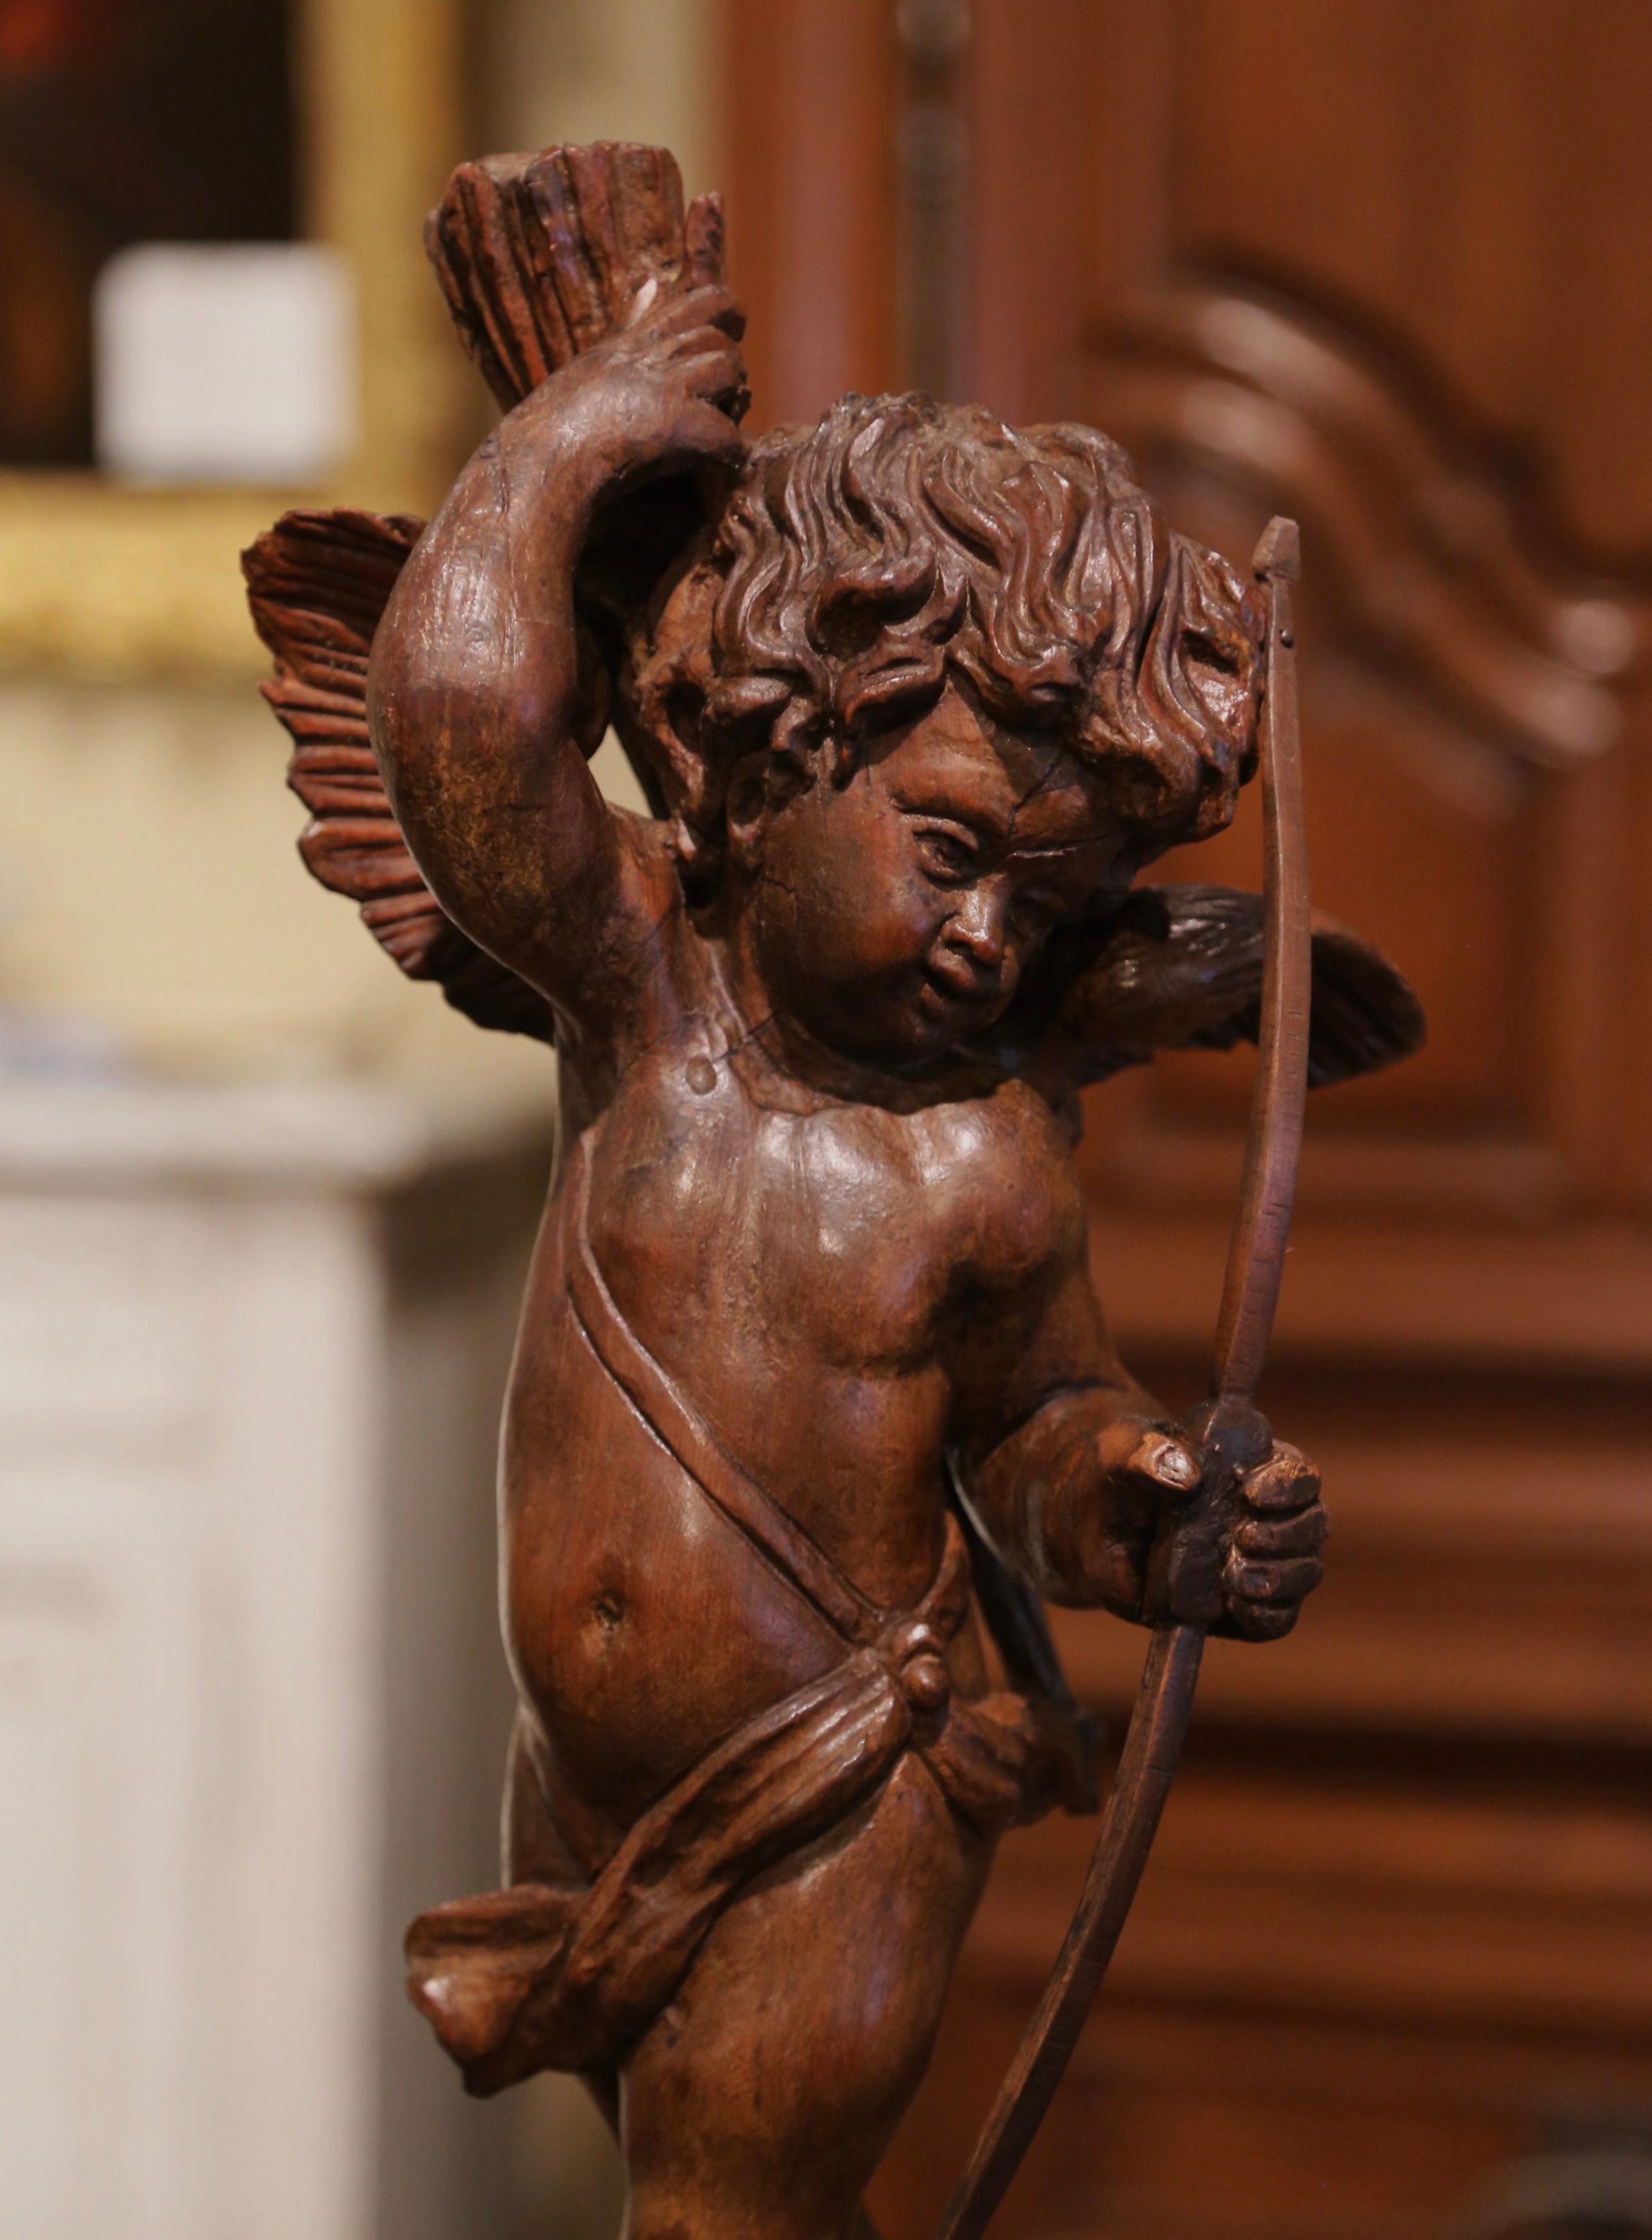 This elegant antique putti figure was carved in France, circa 1750. Standing on a double square base, the detailed statue features a young boy with wings holding a bow in his left hand and reaching for an arrow in his right hand. The adorable cherub